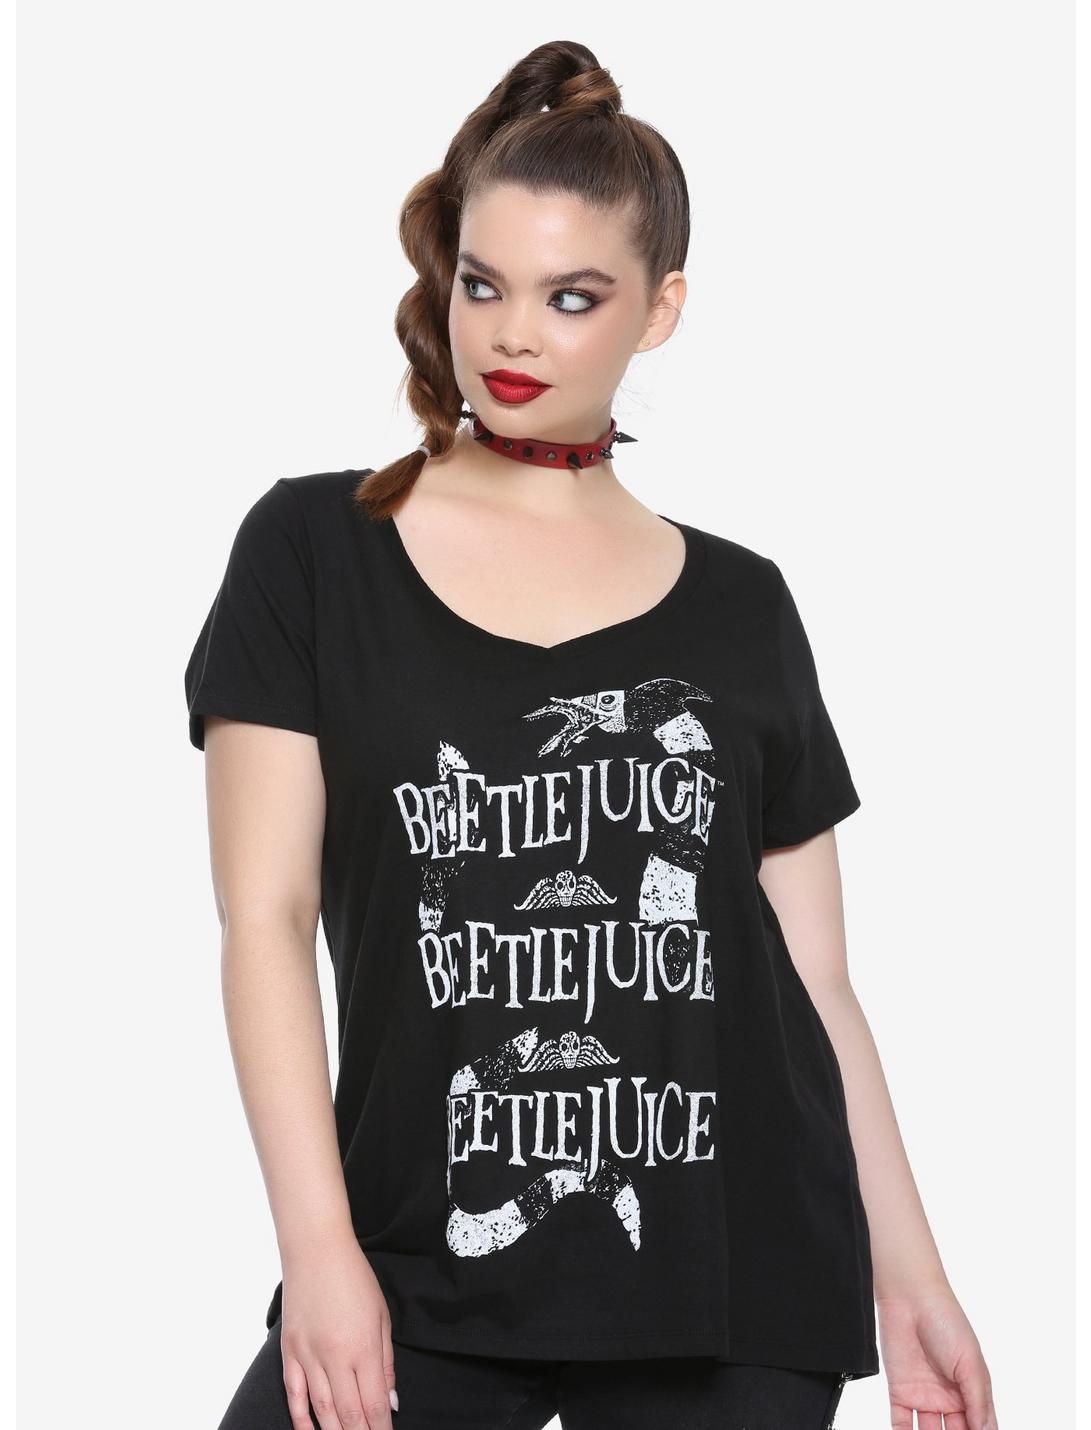 Beetlejuice Repeated Girls V-Neck T-Shirt Plus Size | Hot Topic